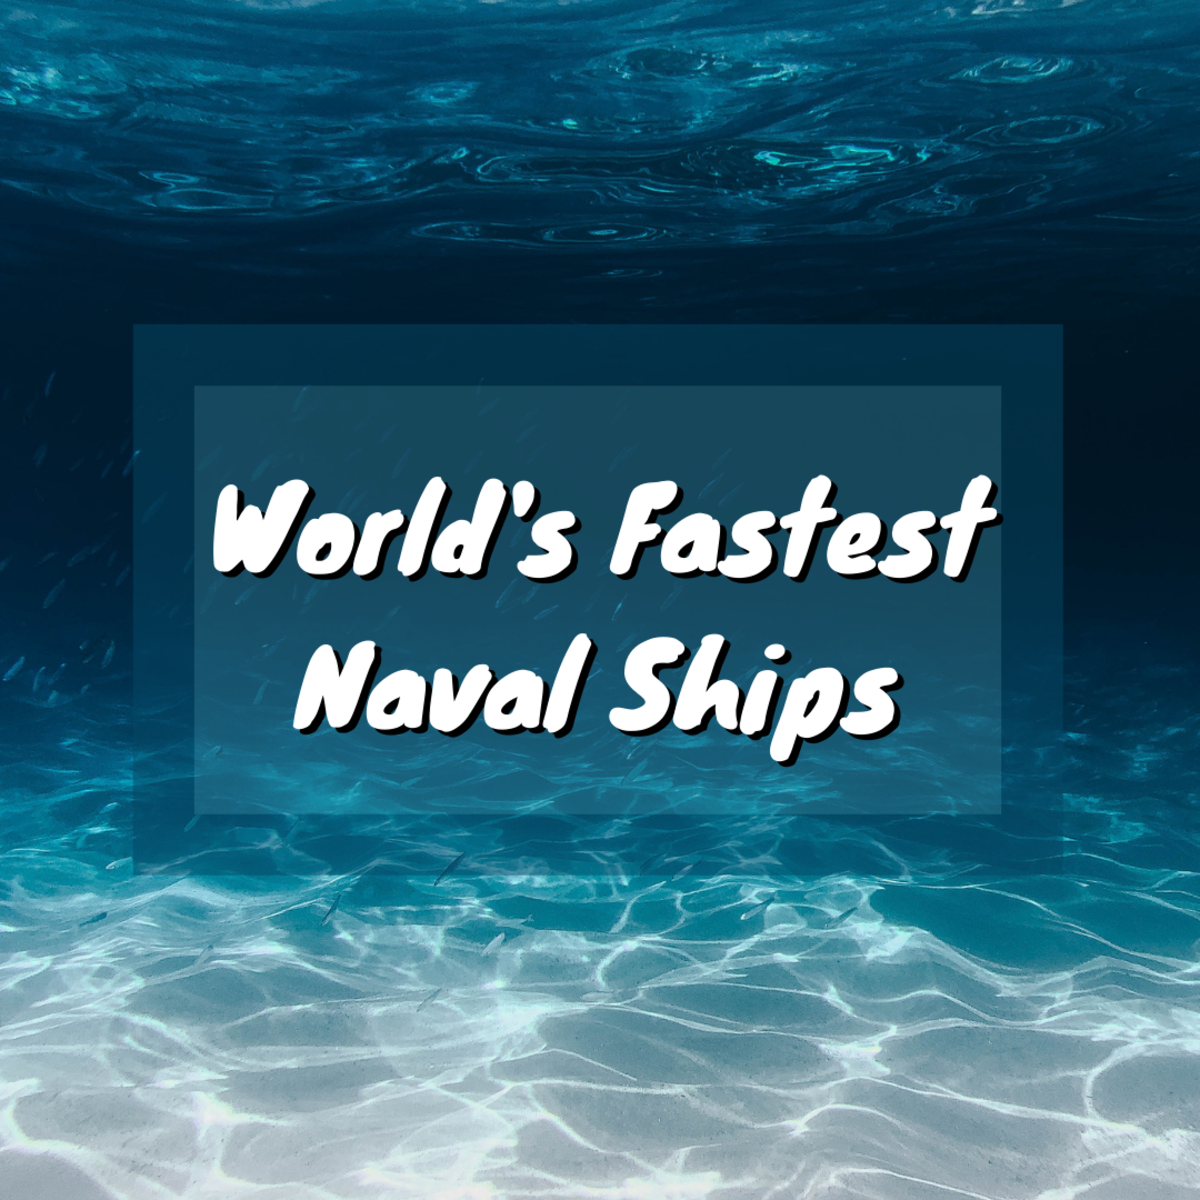 Fastest Navy Ships in the World